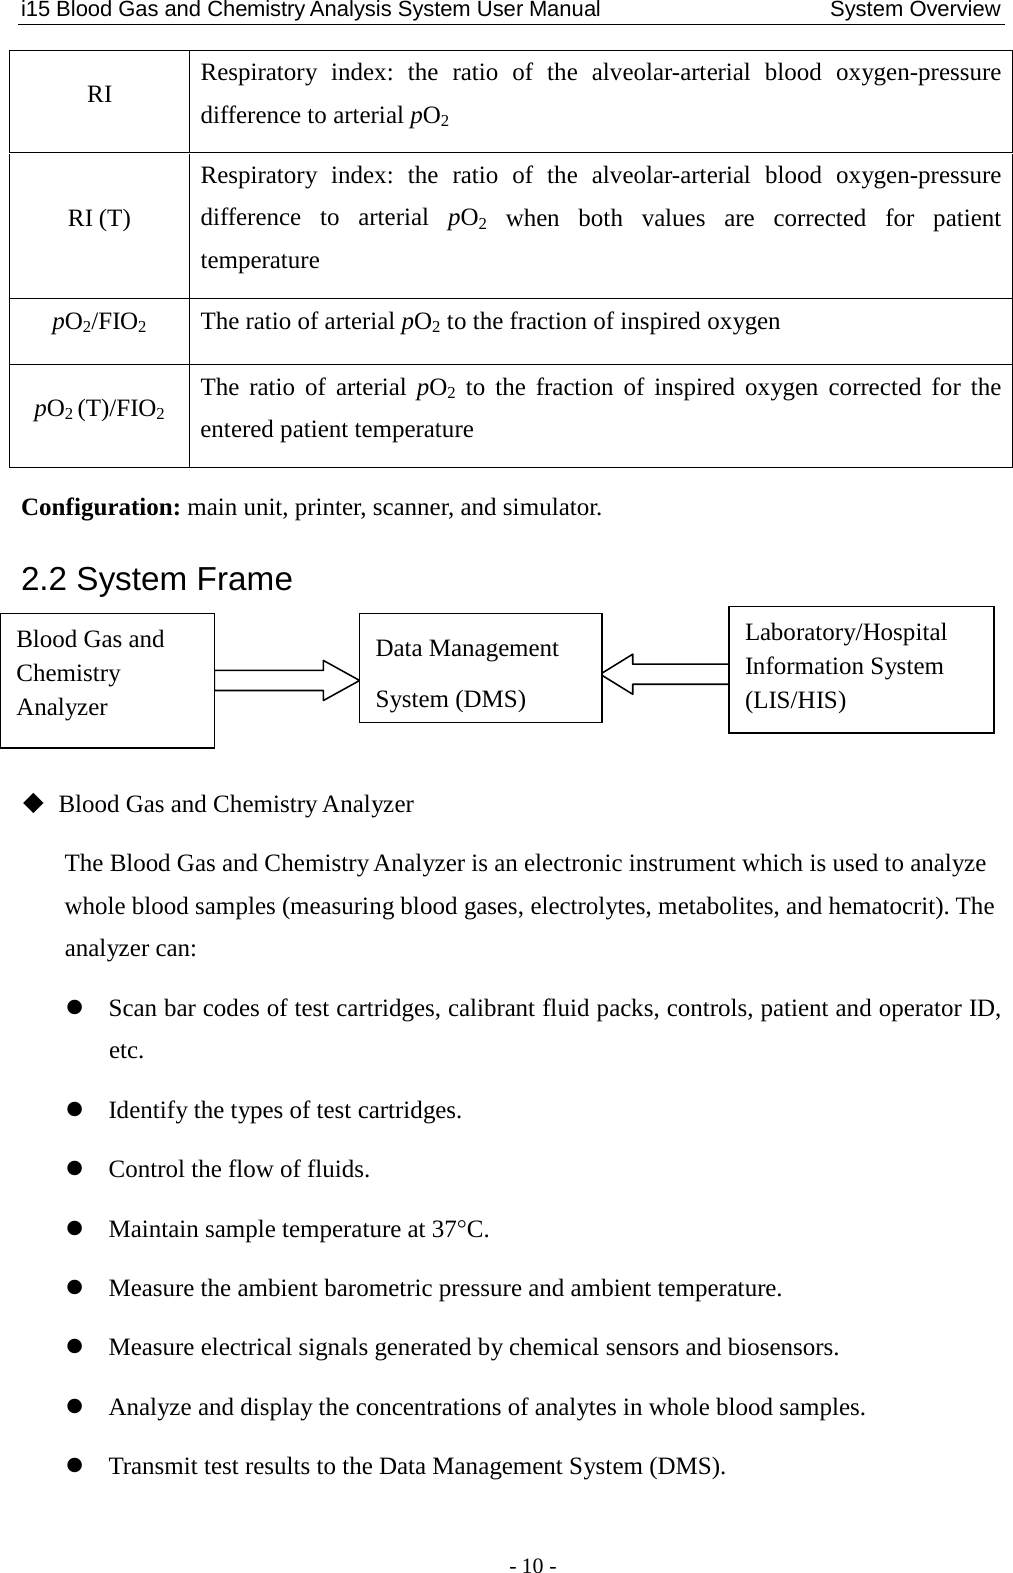 i15 Blood Gas and Chemistry Analysis System User Manual                     System Overview - 10 - RI Respiratory index: the ratio of the alveolar-arterial blood oxygen-pressure difference to arterial pO2 RI (T) Respiratory index: the ratio of the alveolar-arterial  blood oxygen-pressure difference to arterial pO2 when both values are corrected for patient temperature pO2/FIO2  The ratio of arterial pO2 to the fraction of inspired oxygen pO2 (T)/FIO2 The ratio of arterial pO2 to the fraction of inspired oxygen corrected for the entered patient temperature Configuration: main unit, printer, scanner, and simulator. 2.2 System Frame     Blood Gas and Chemistry Analyzer The Blood Gas and Chemistry Analyzer is an electronic instrument which is used to analyze whole blood samples (measuring blood gases, electrolytes, metabolites, and hematocrit). The analyzer can:  Scan bar codes of test cartridges, calibrant fluid packs, controls, patient and operator ID, etc.  Identify the types of test cartridges.  Control the flow of fluids.  Maintain sample temperature at 37°C.  Measure the ambient barometric pressure and ambient temperature.  Measure electrical signals generated by chemical sensors and biosensors.  Analyze and display the concentrations of analytes in whole blood samples.  Transmit test results to the Data Management System (DMS). Blood Gas and Chemistry Analyzer Data Management System (DMS) Laboratory/Hospital Information System (LIS/HIS) 